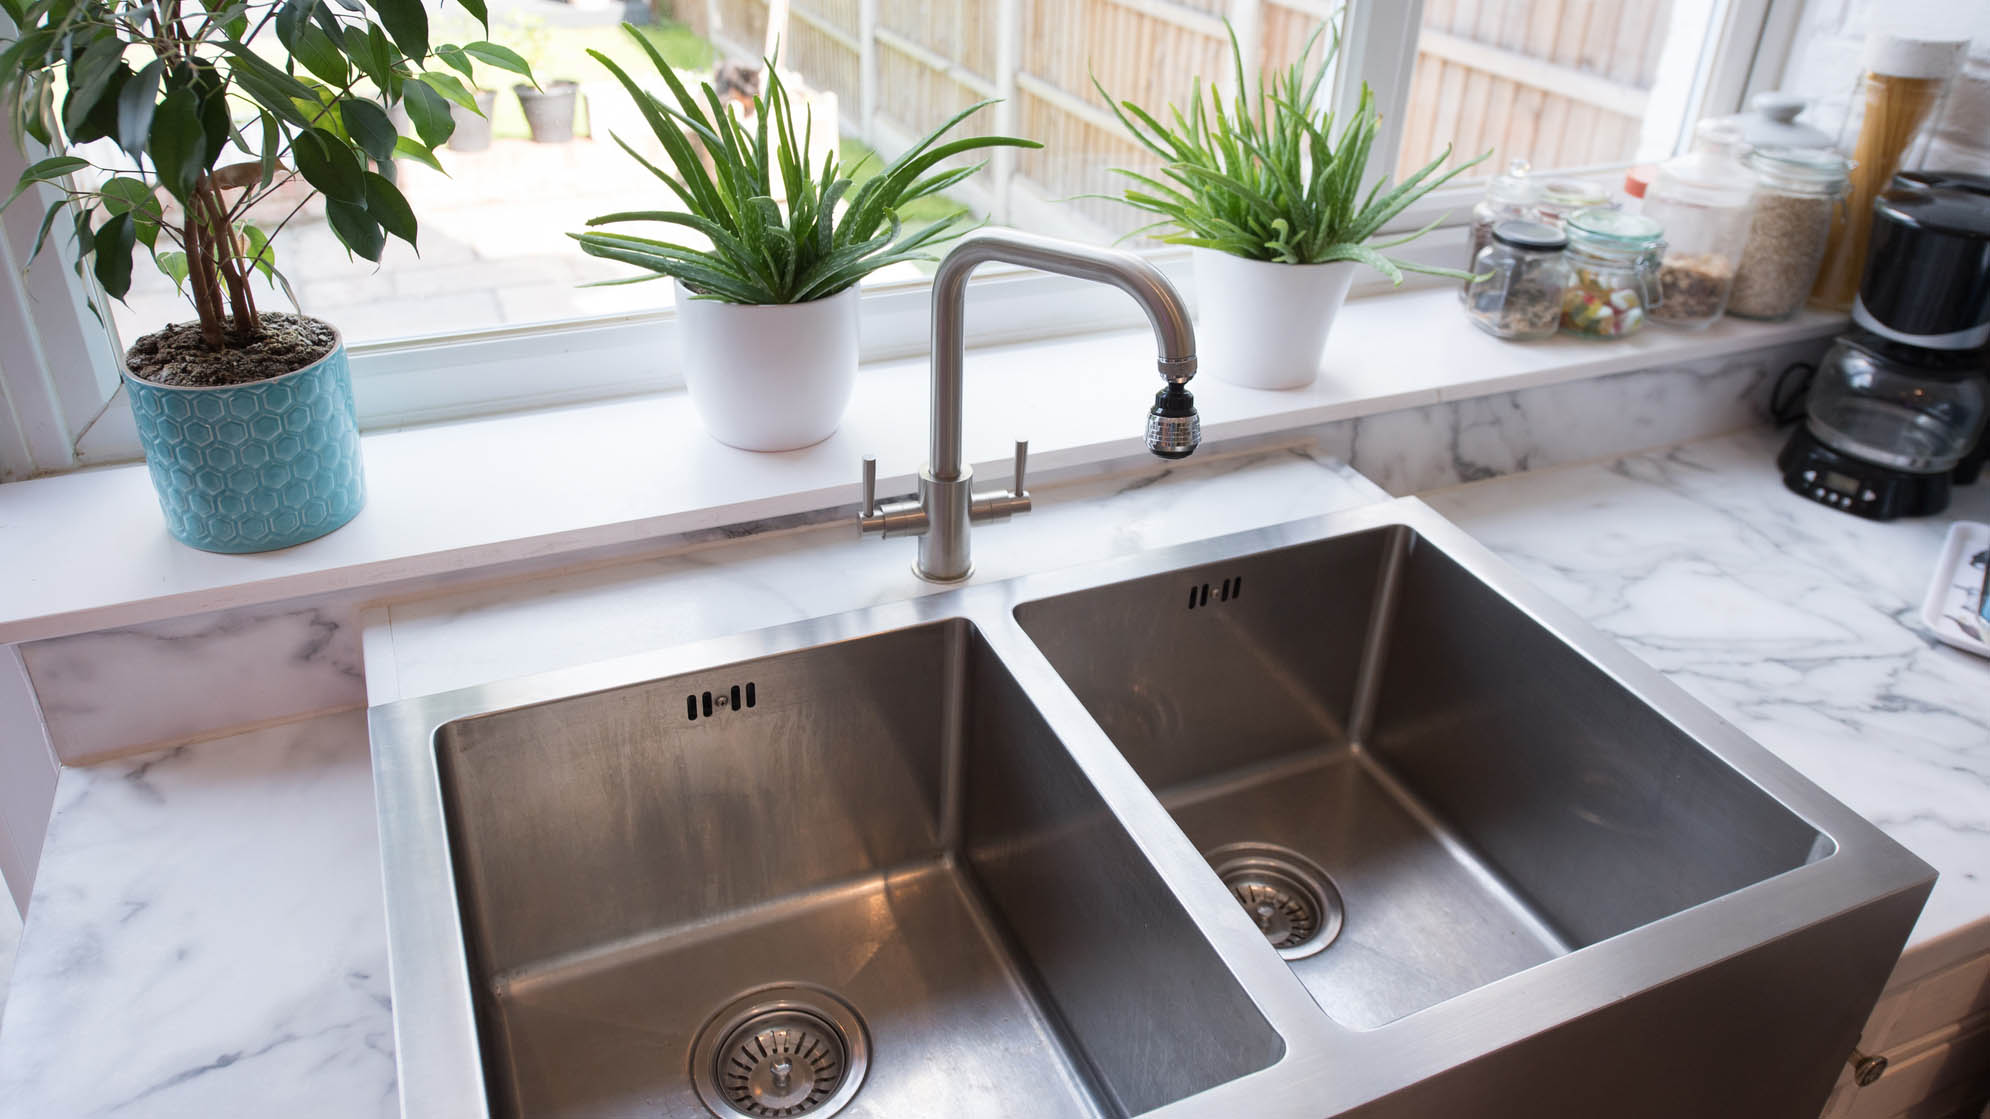 How to Clean Stainless Steel Sink In 5 Easy Steps!